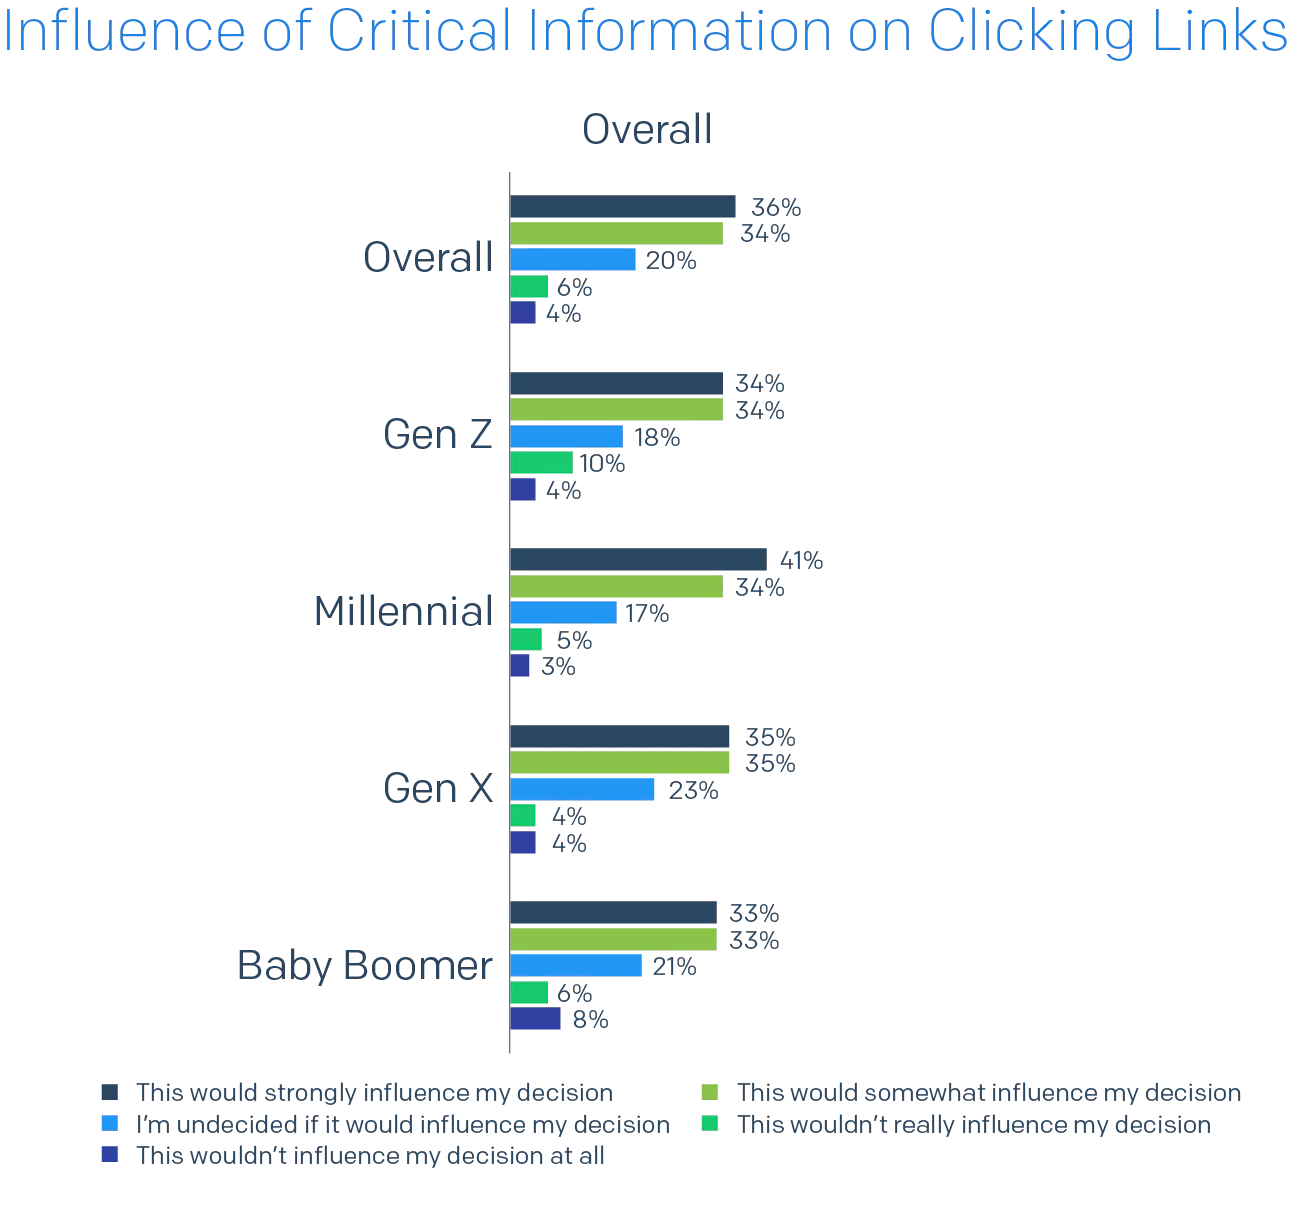 Bar chart of Influence of Critical Information on Clicking Links